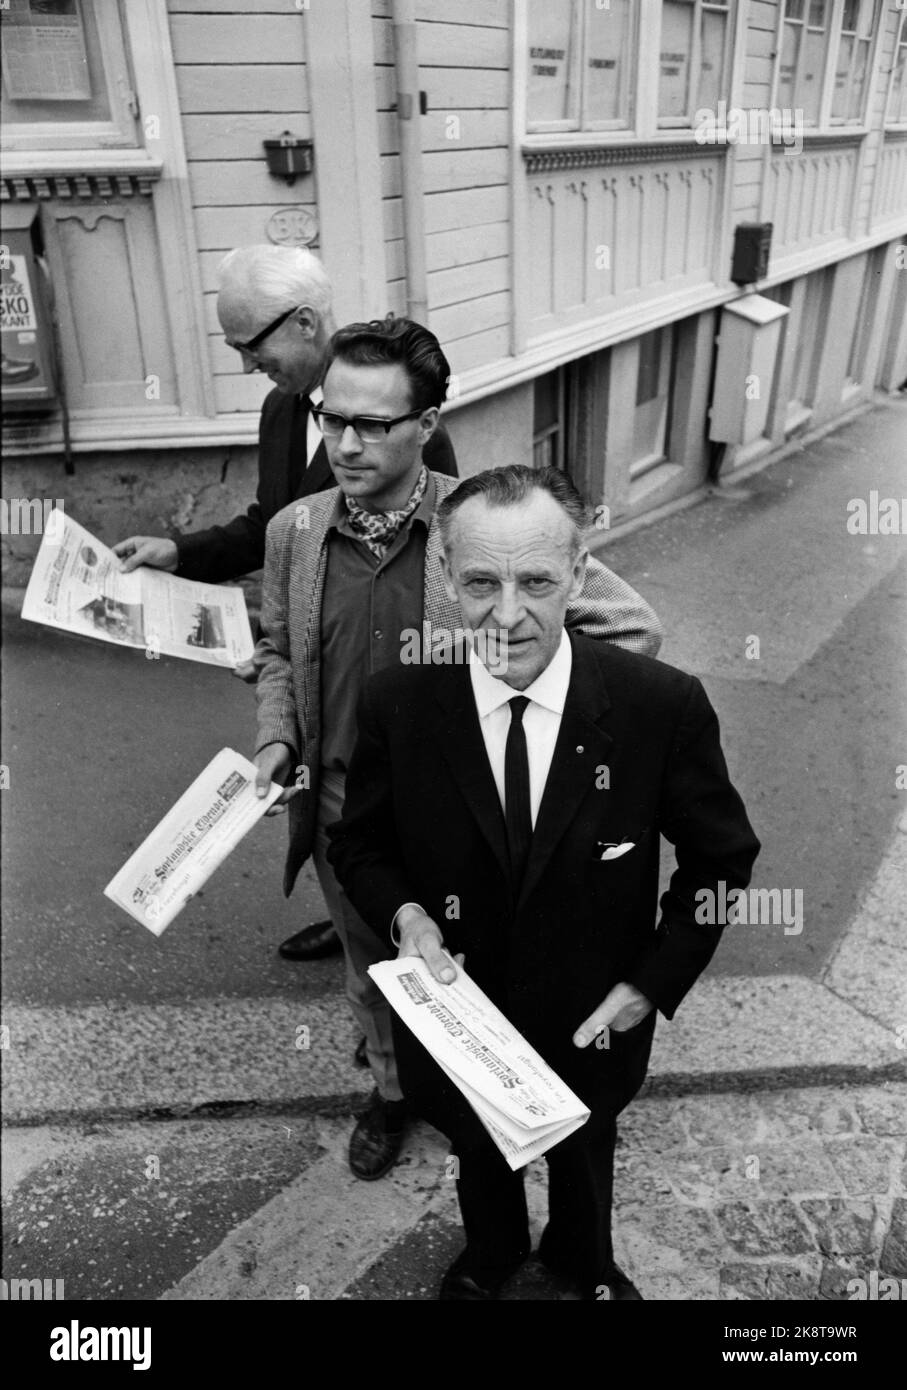 Arendal 19660901. Three editors with three political views in local cooperation on the newspaper Southern Tidende. It is a 'coalition newspaper'. Eg. Editor Arnold Brattli (Kr.F.) Torbjørn Greipland (Sp) and chief editor Alv Kristiansen (H), stand here with the newspaper. This was a way out of an economically disabled for the Western Tidende (right-wing newspaper) who opened its gaps to the other two parties. Thus it became a new name and tabloid. Photo: Jan Erik Olsen / Current / NTB Stock Photo